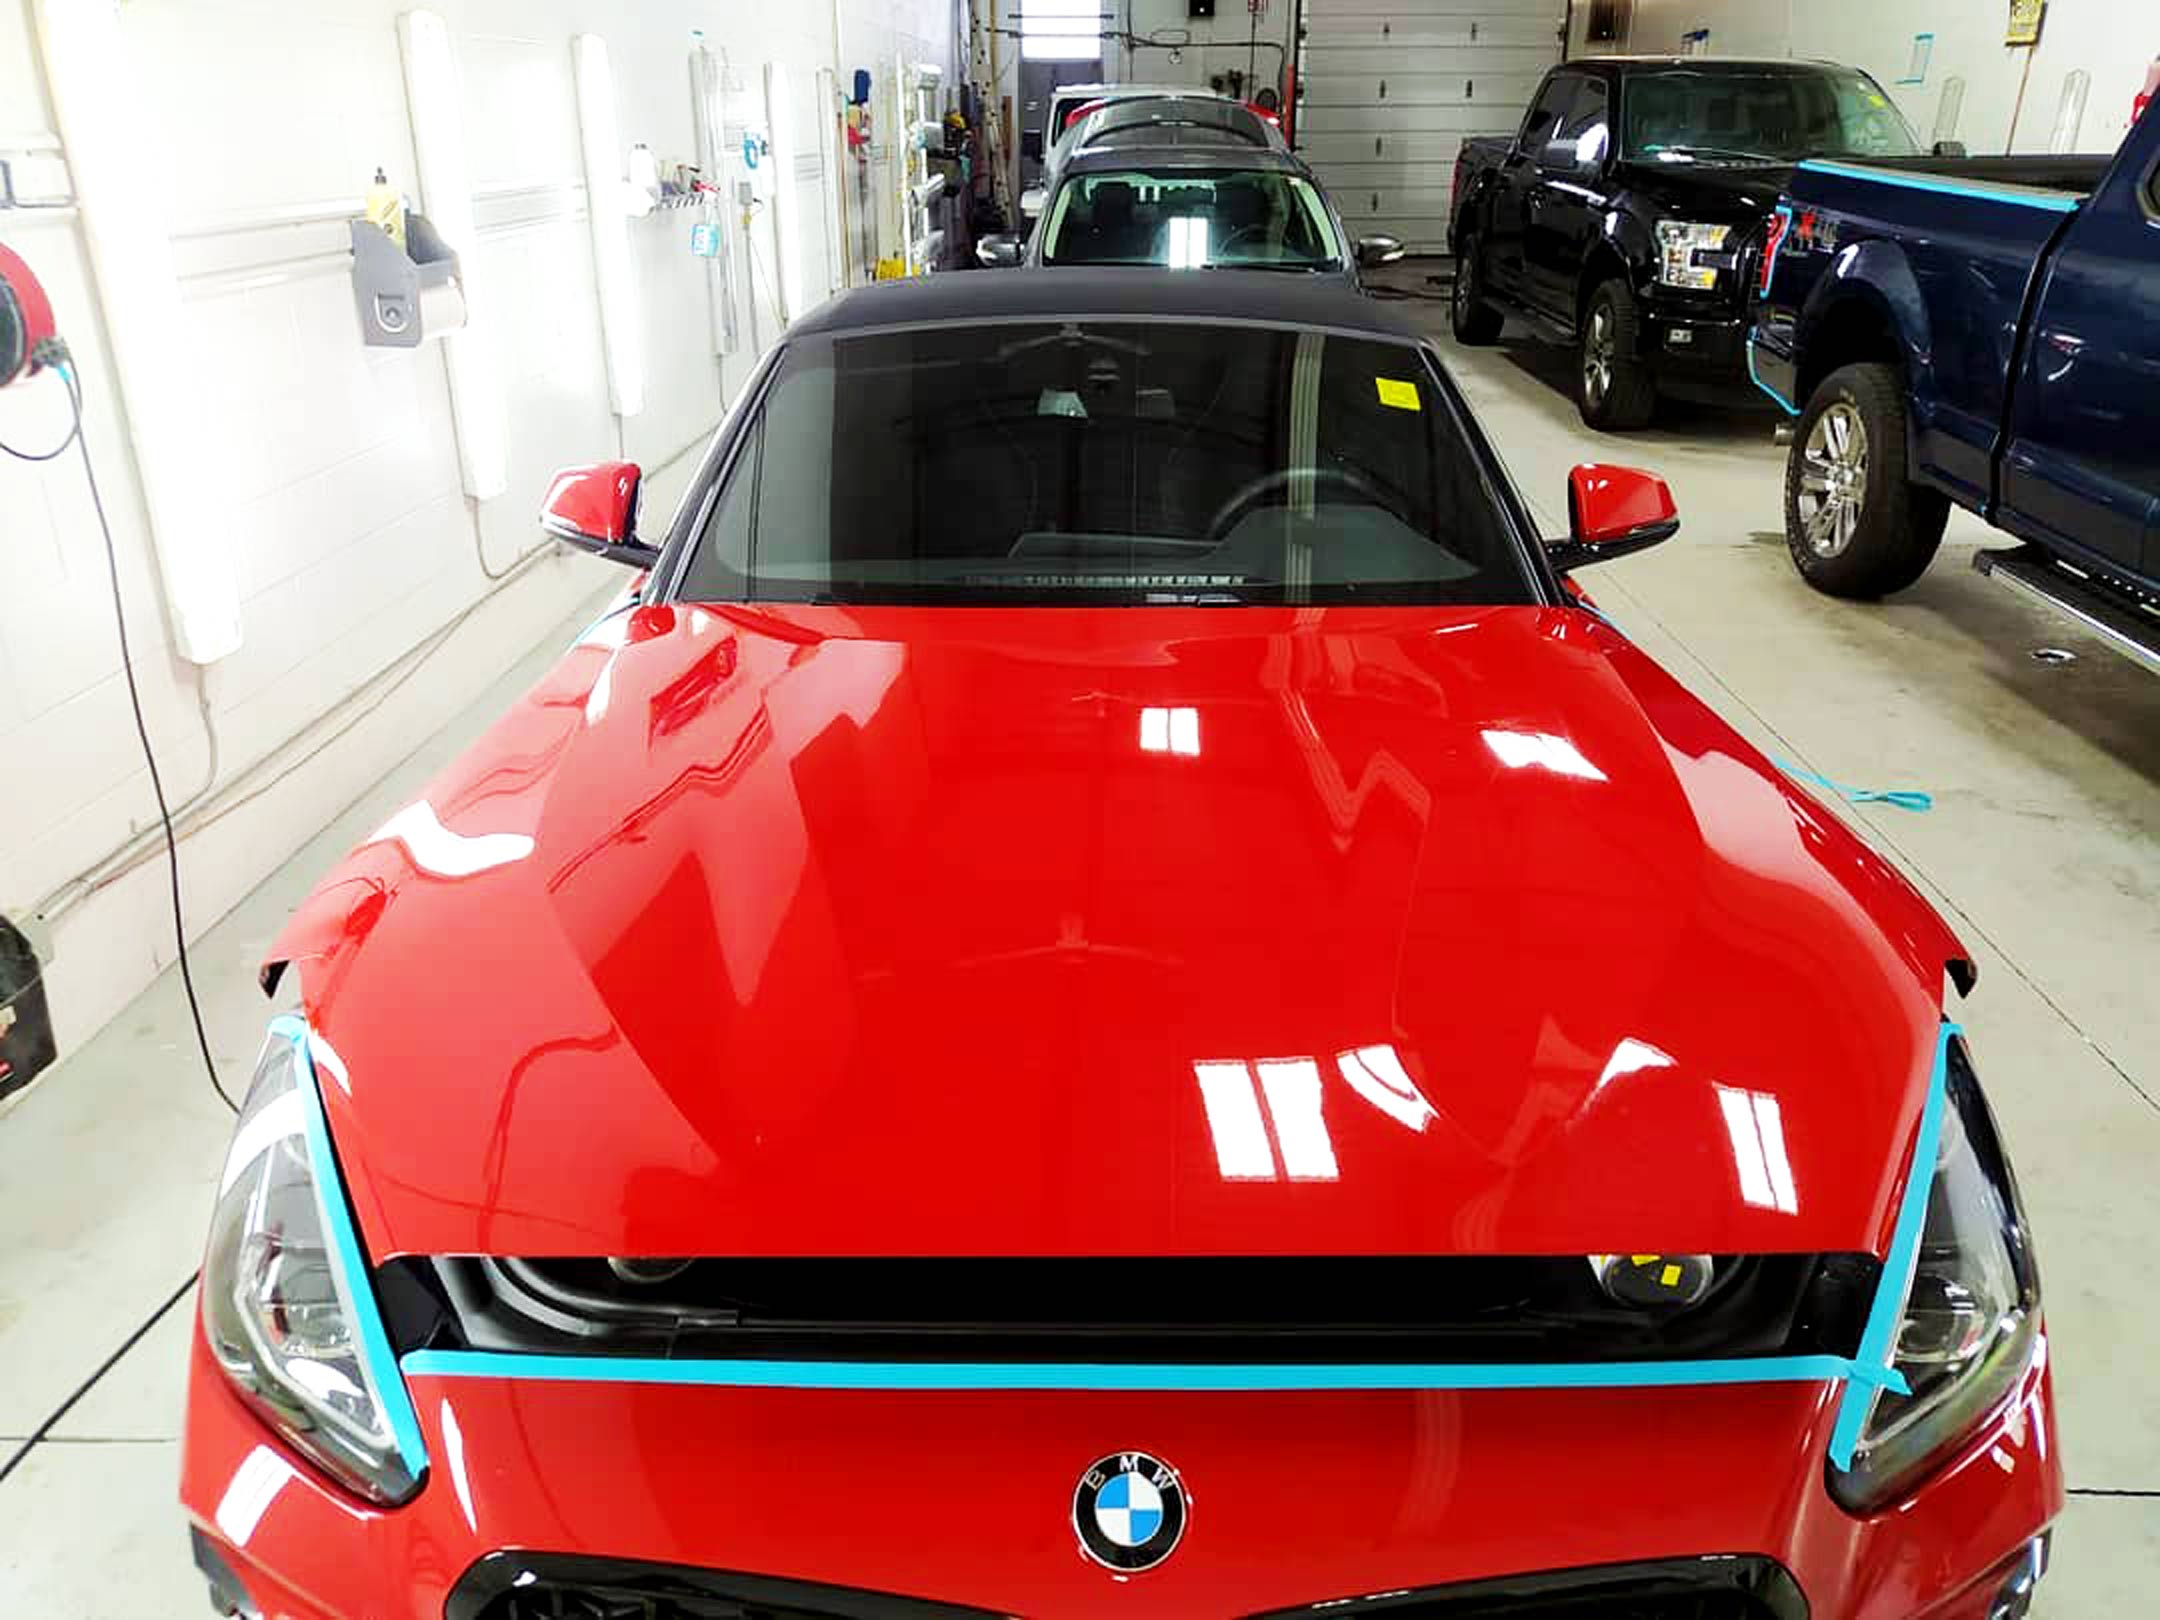 Shiny red BMW convertible being prepared for paint restoration inside the brightly lit RestorFX Barrie Center